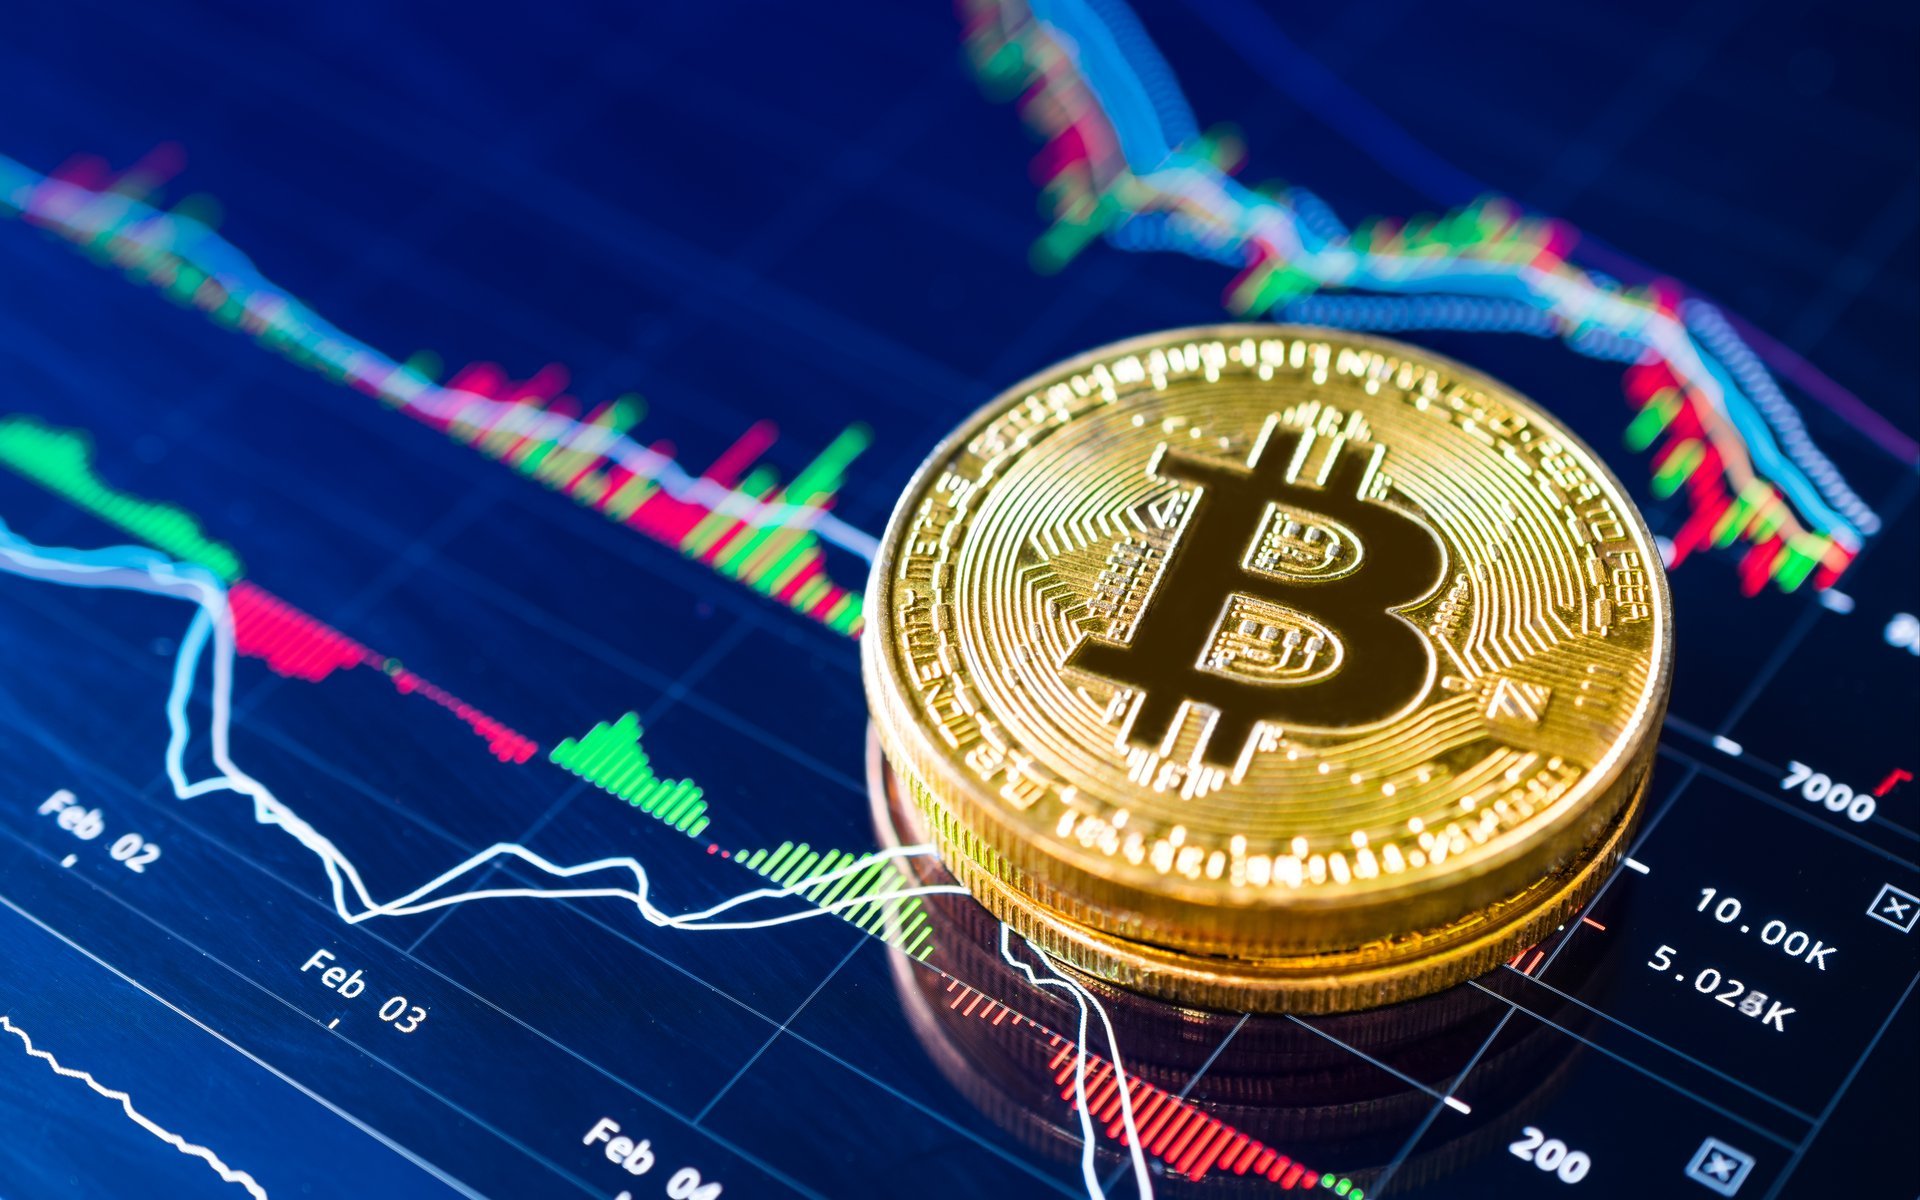 Bitcoin Could Surge To $5000 In Coming Weeks, Analyst Claims